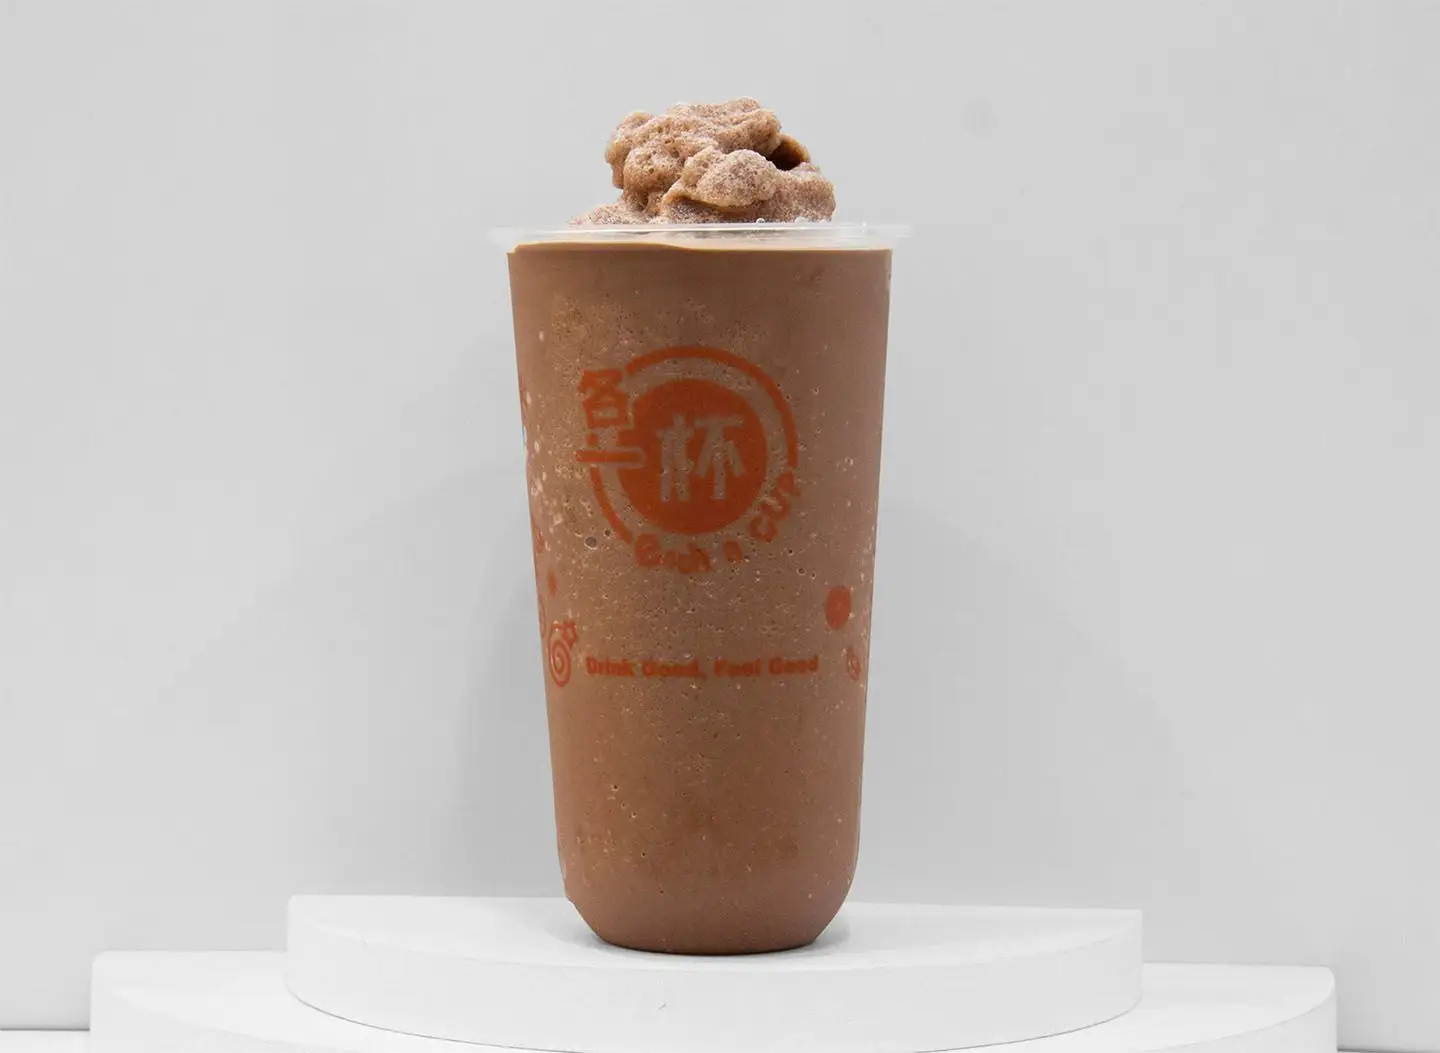 Chocolate Ice Blended